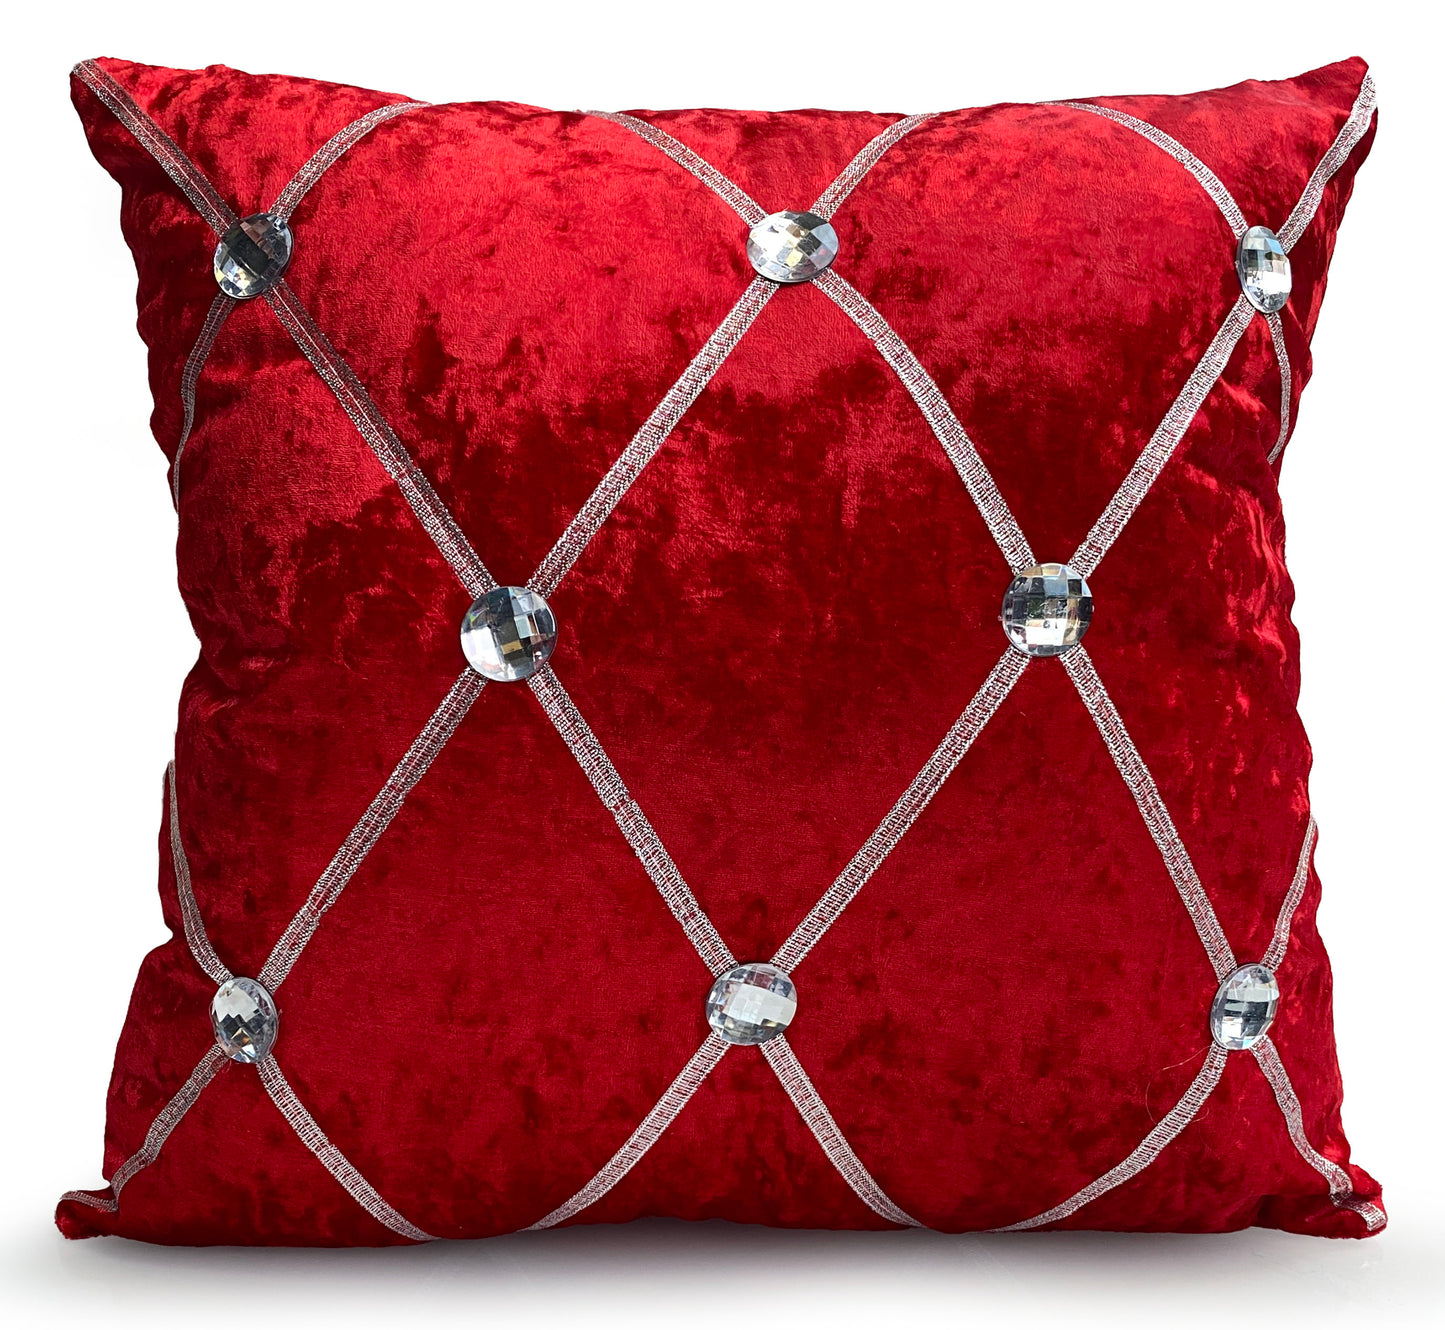 Large Crush Velvet Diamante Chesterfield Cushions or Covers Red